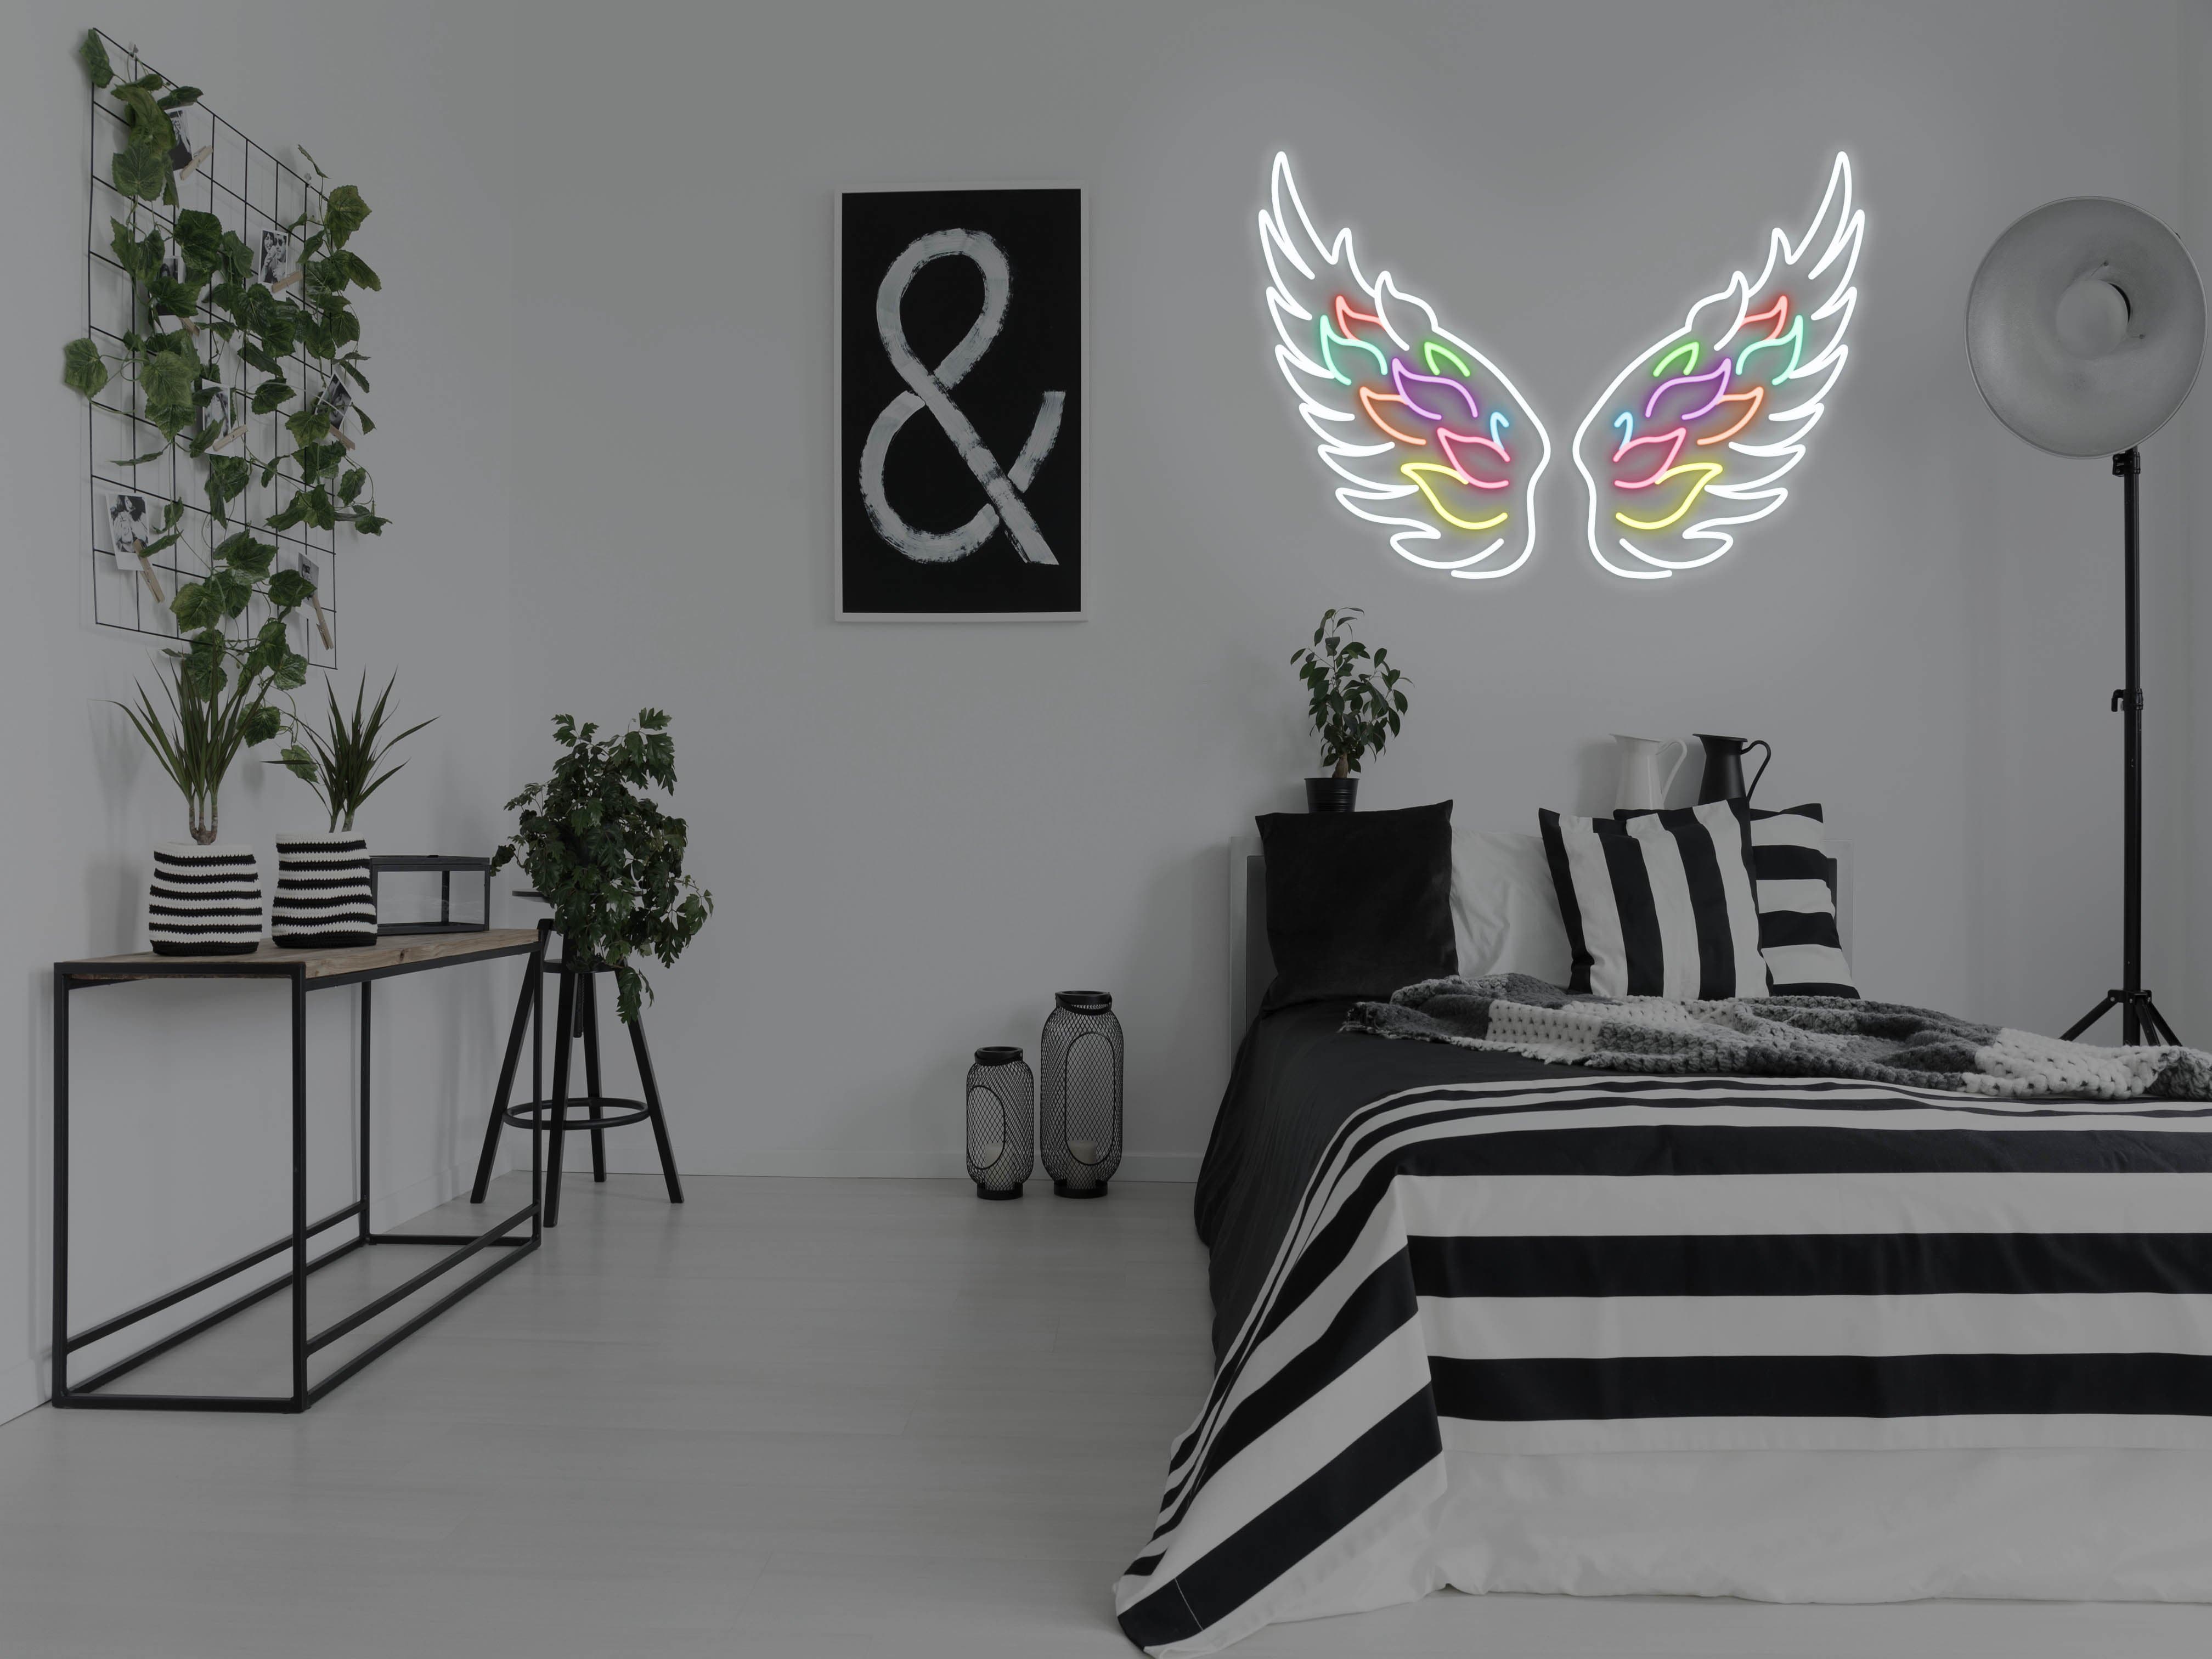 Angel Wings LED Neon Sign Instagobo